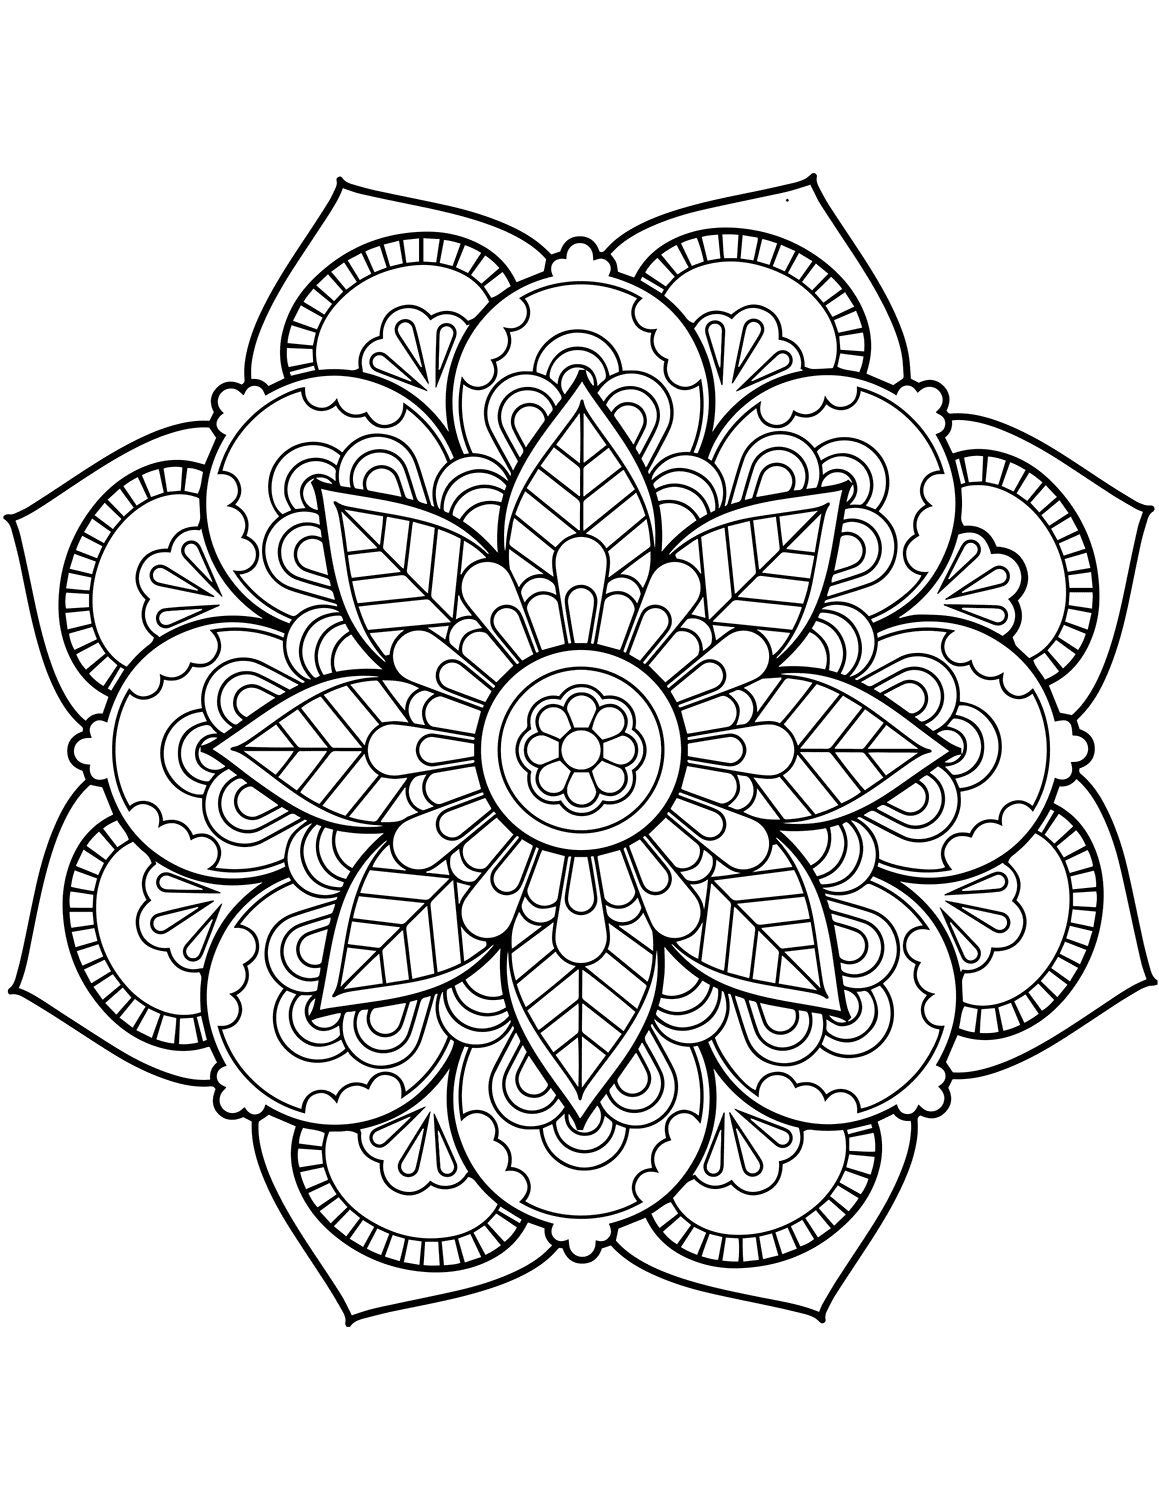 Download Flower Mandala Coloring Pages Best Coloring Pages For Kids